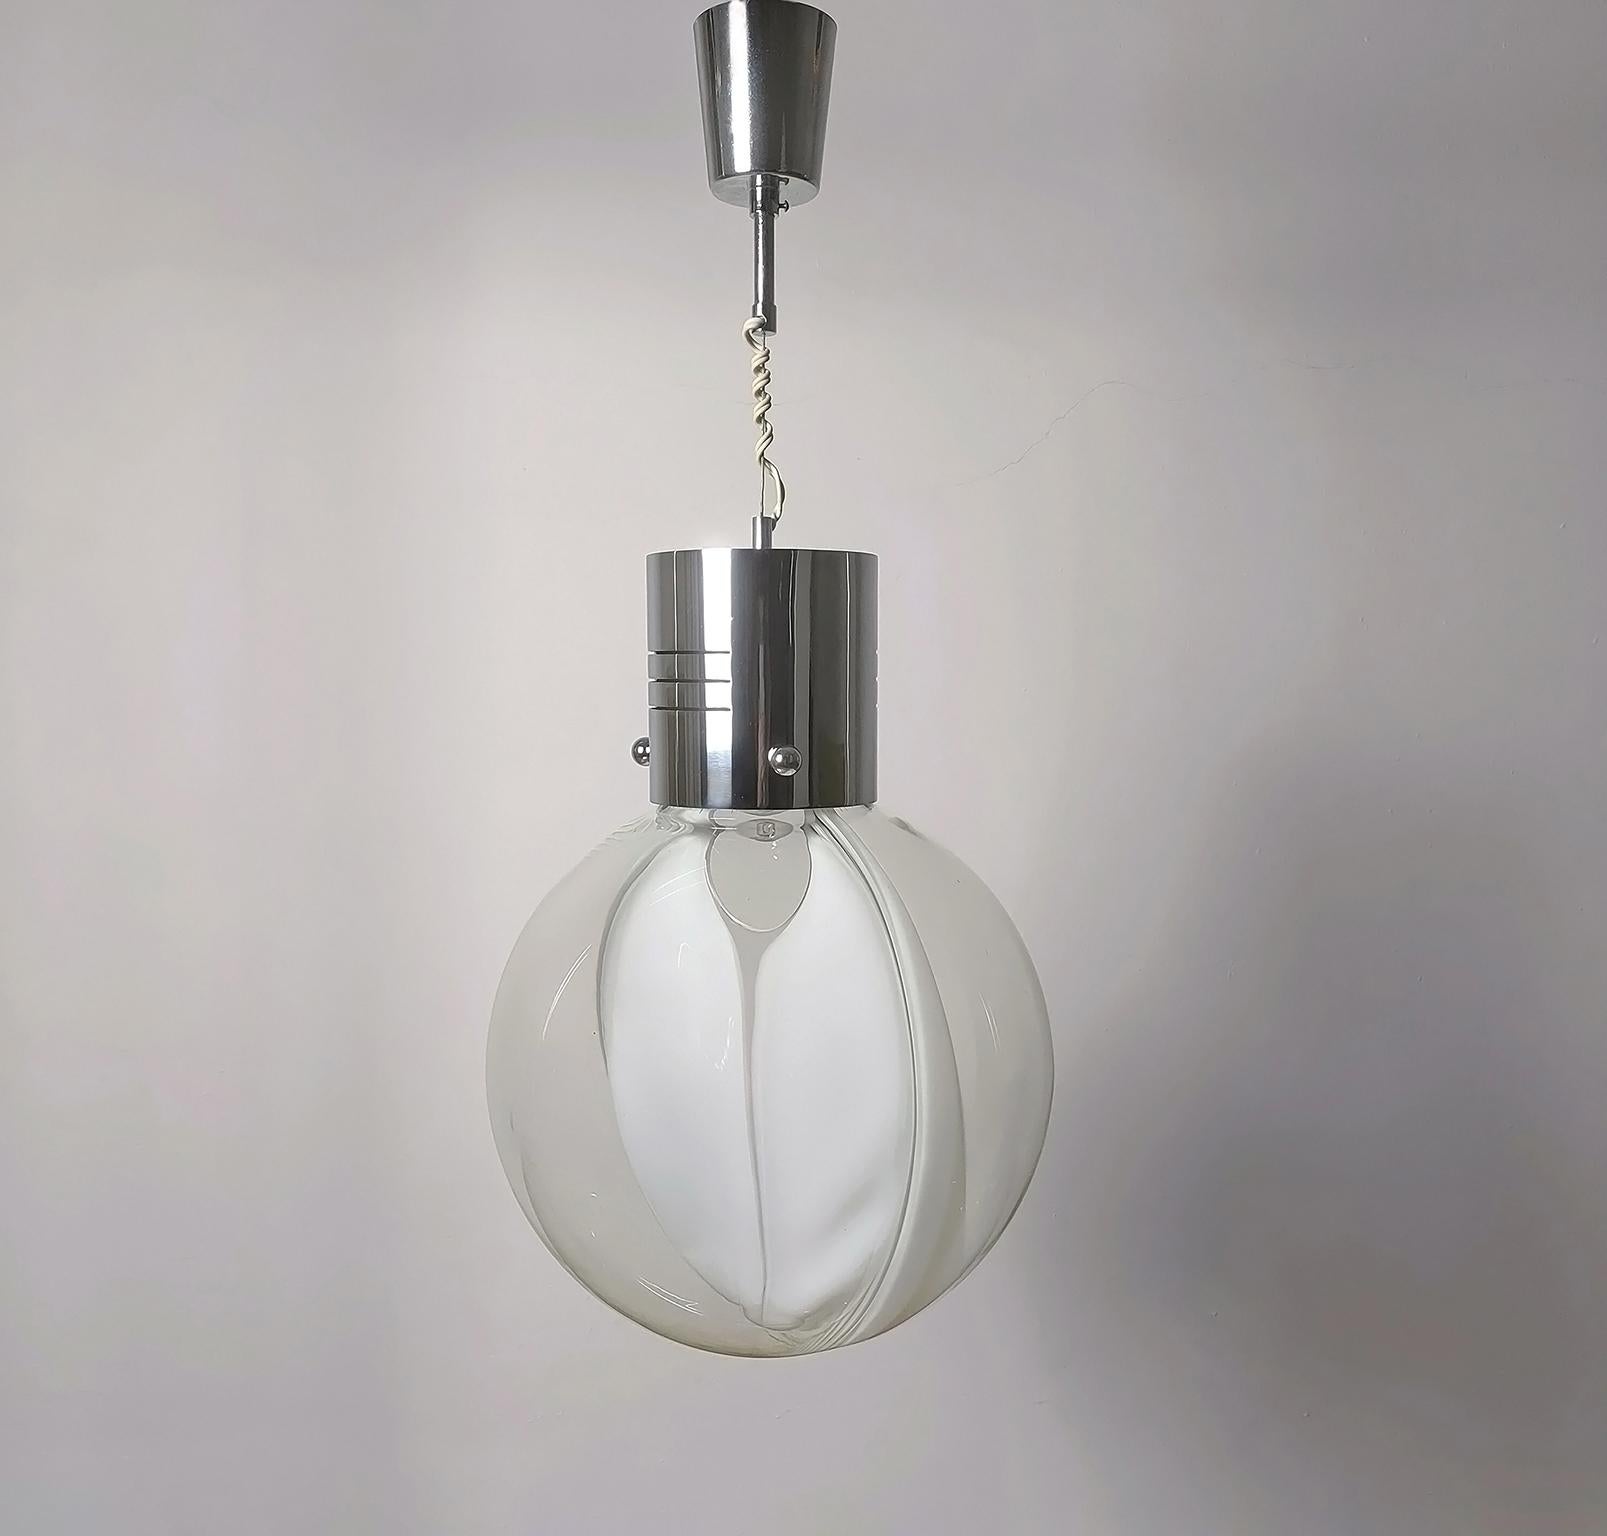 Ceiling or Hanging lamp from the 'Membrane' series, designed by Toni Zuccheri and created between 1966 and 1968 by the famous Italian company Venini.

The lamp presents a round shape globe in blown clear glass, which has inside a milky glass